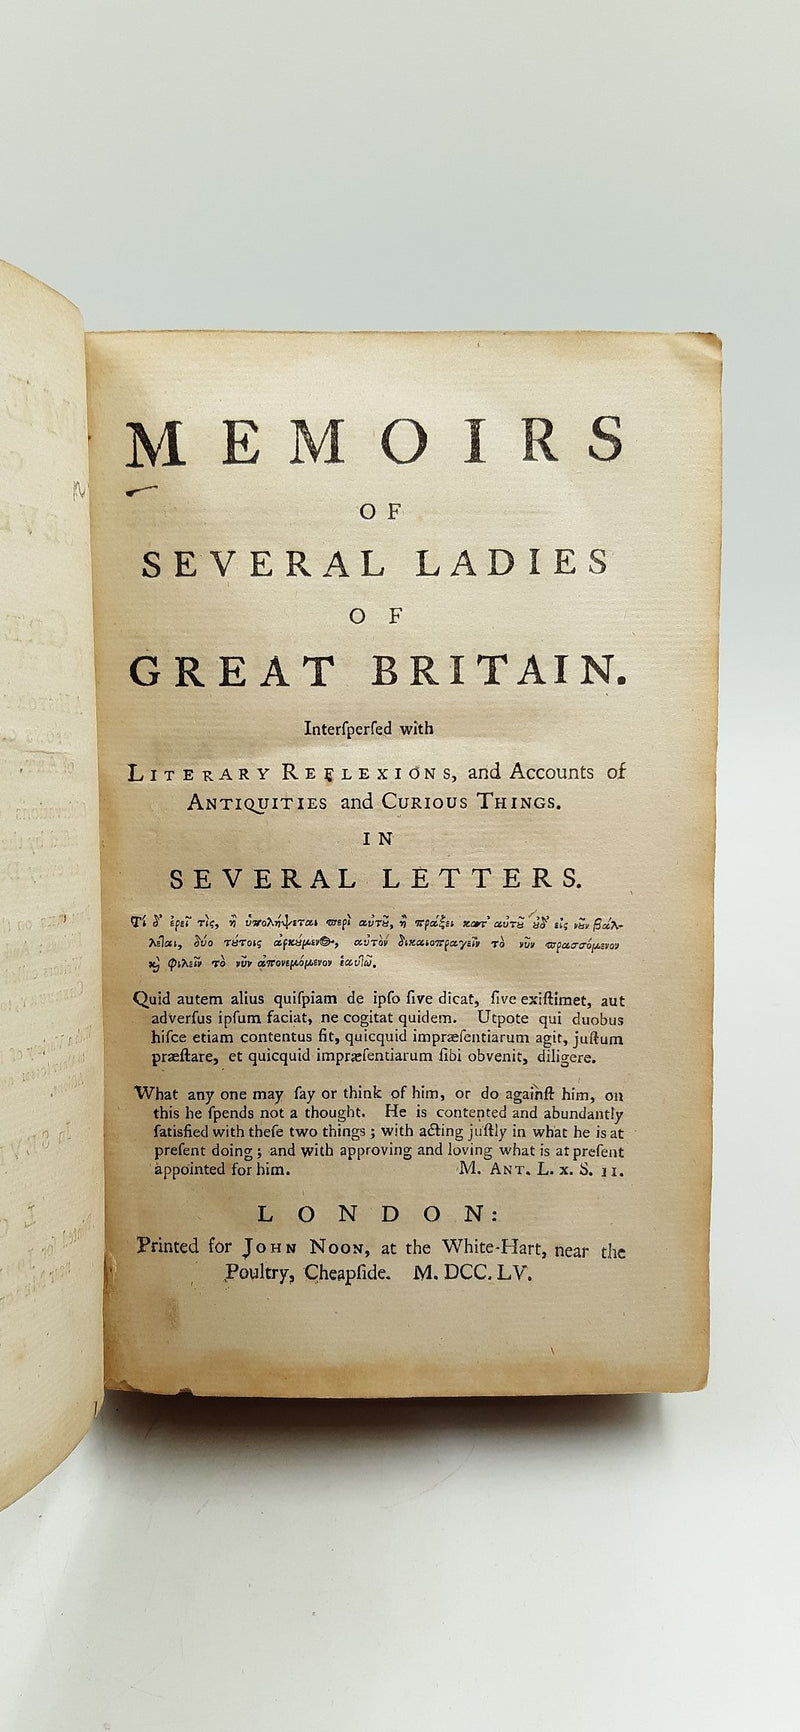 Memoirs: Containing the Lives of Several Ladies of Great Britain